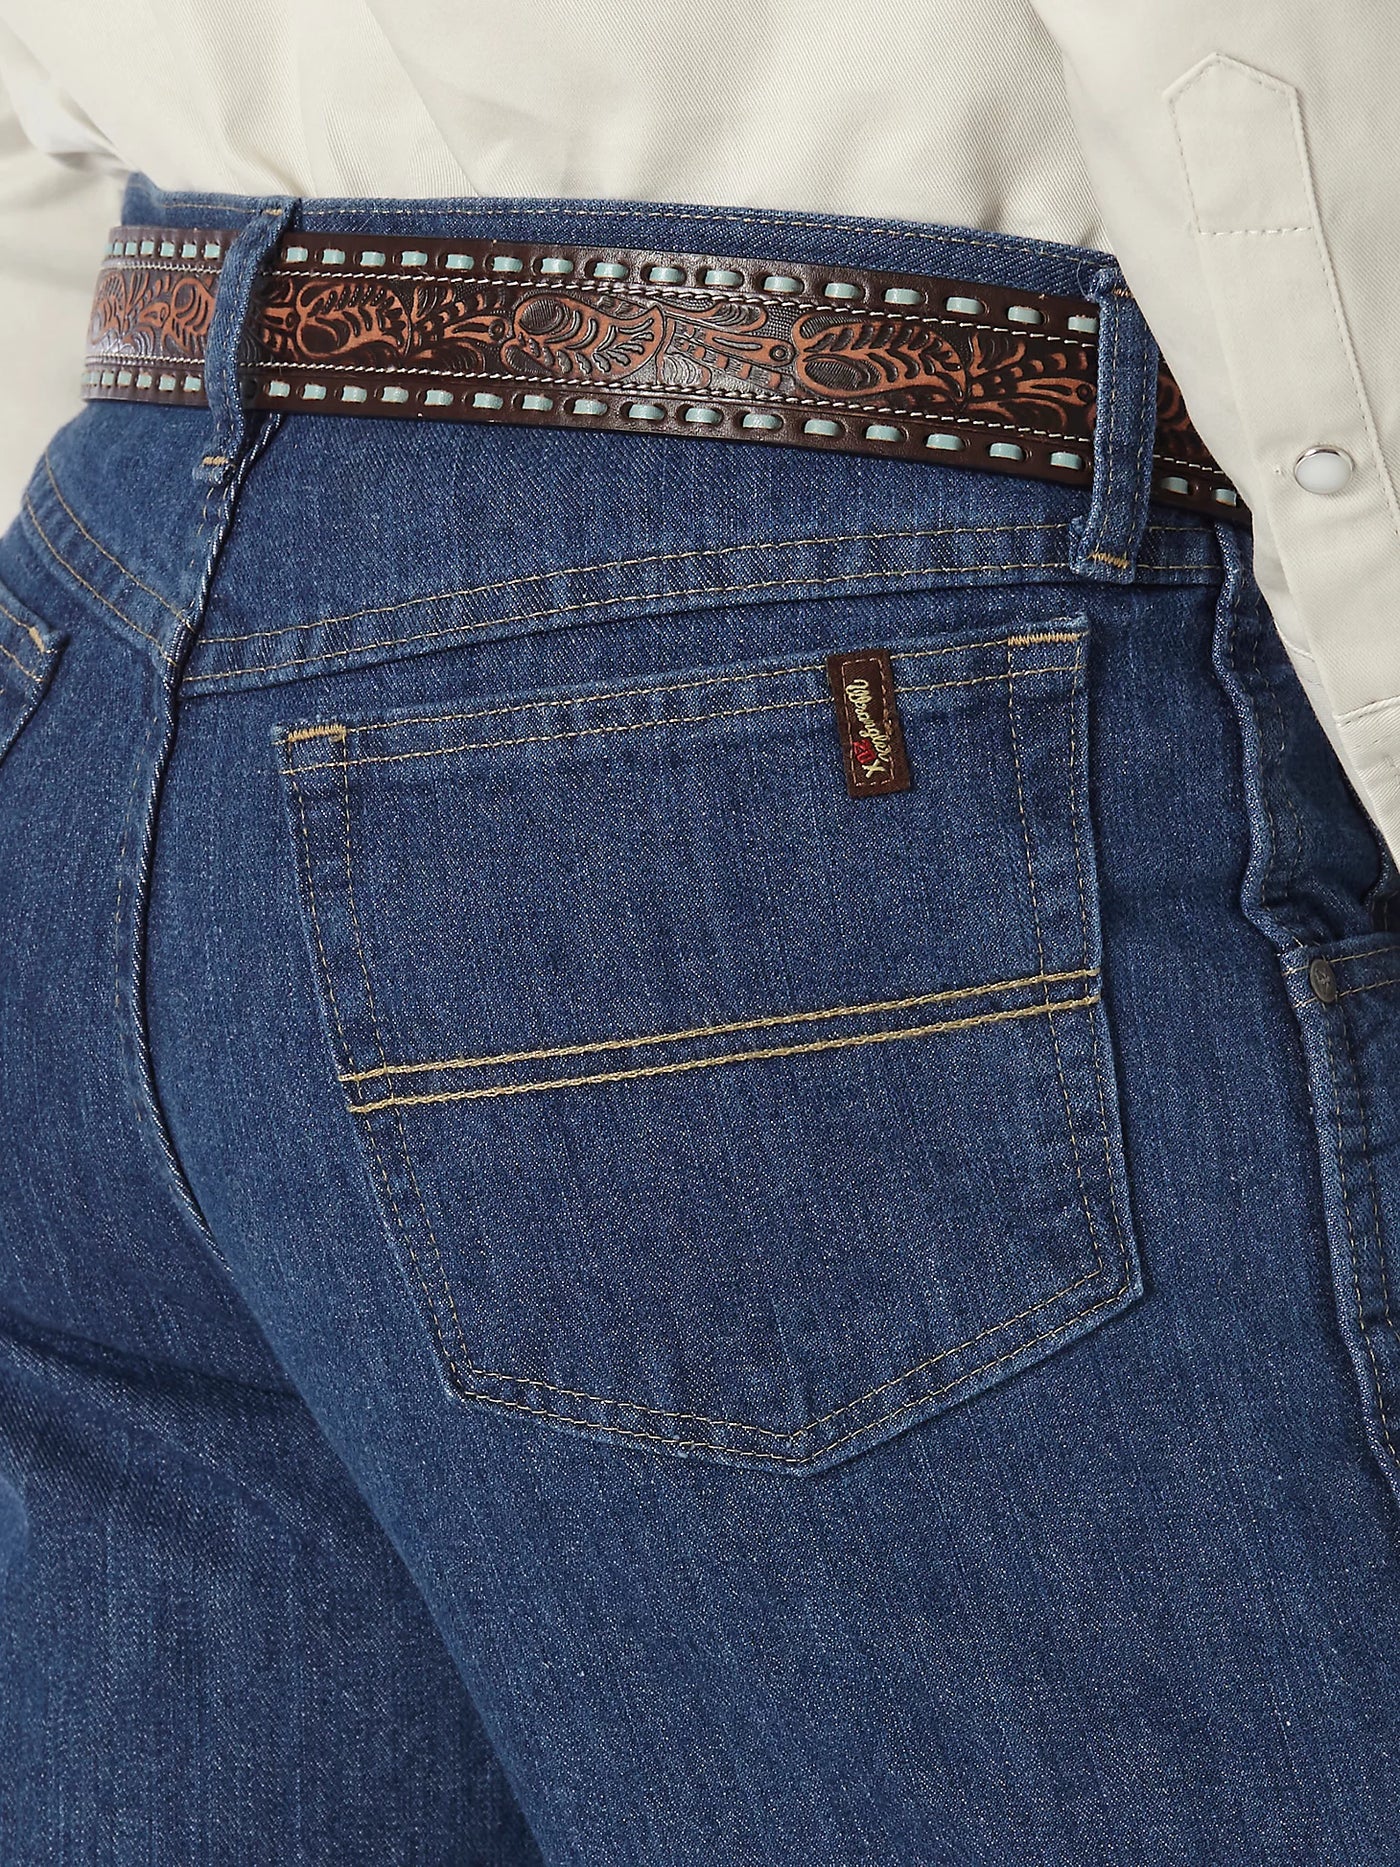 Wrangler 20X Men's NO. 23 Relaxed Fit In Vintage Blue